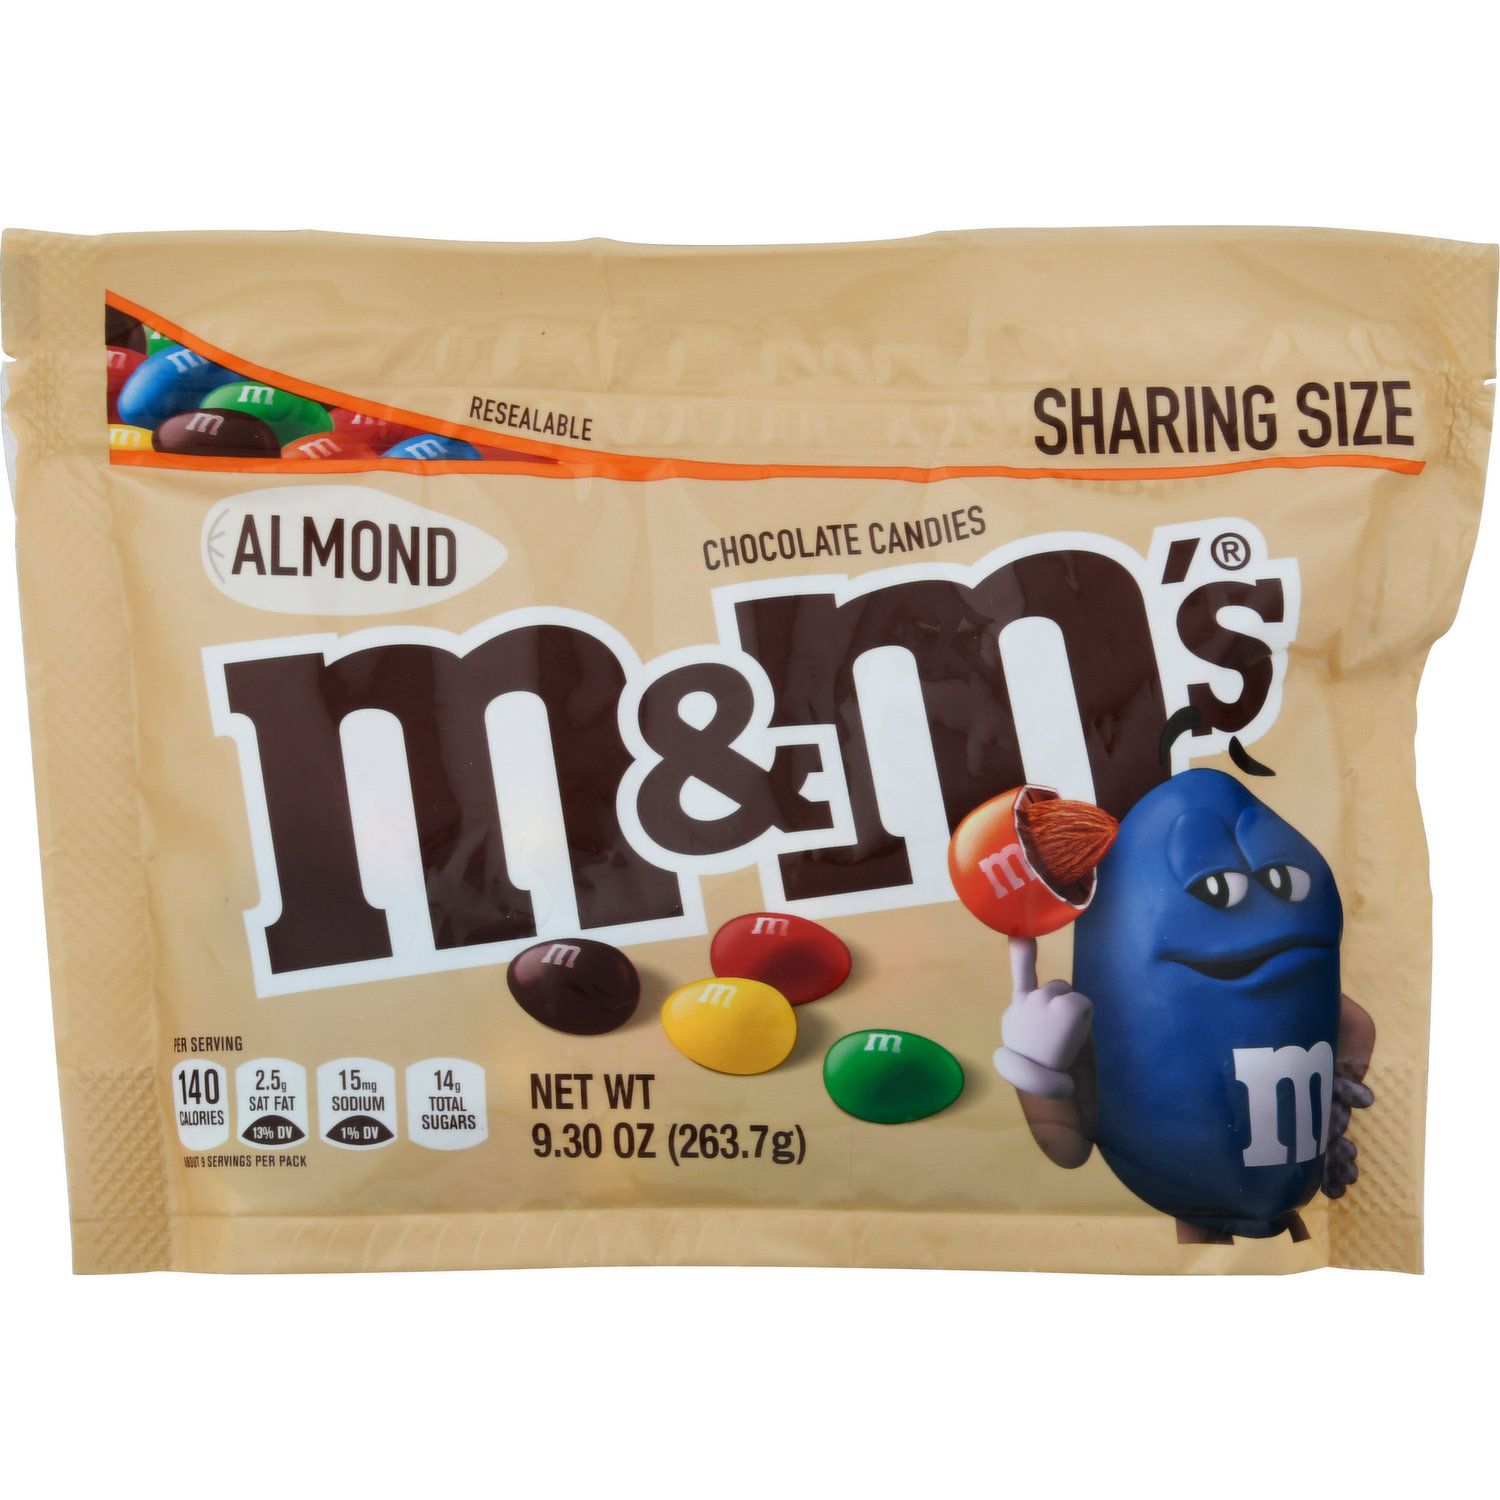 M&M'S Milk Chocolate Candy Family Size Bag, 19.2 oz - Baker's